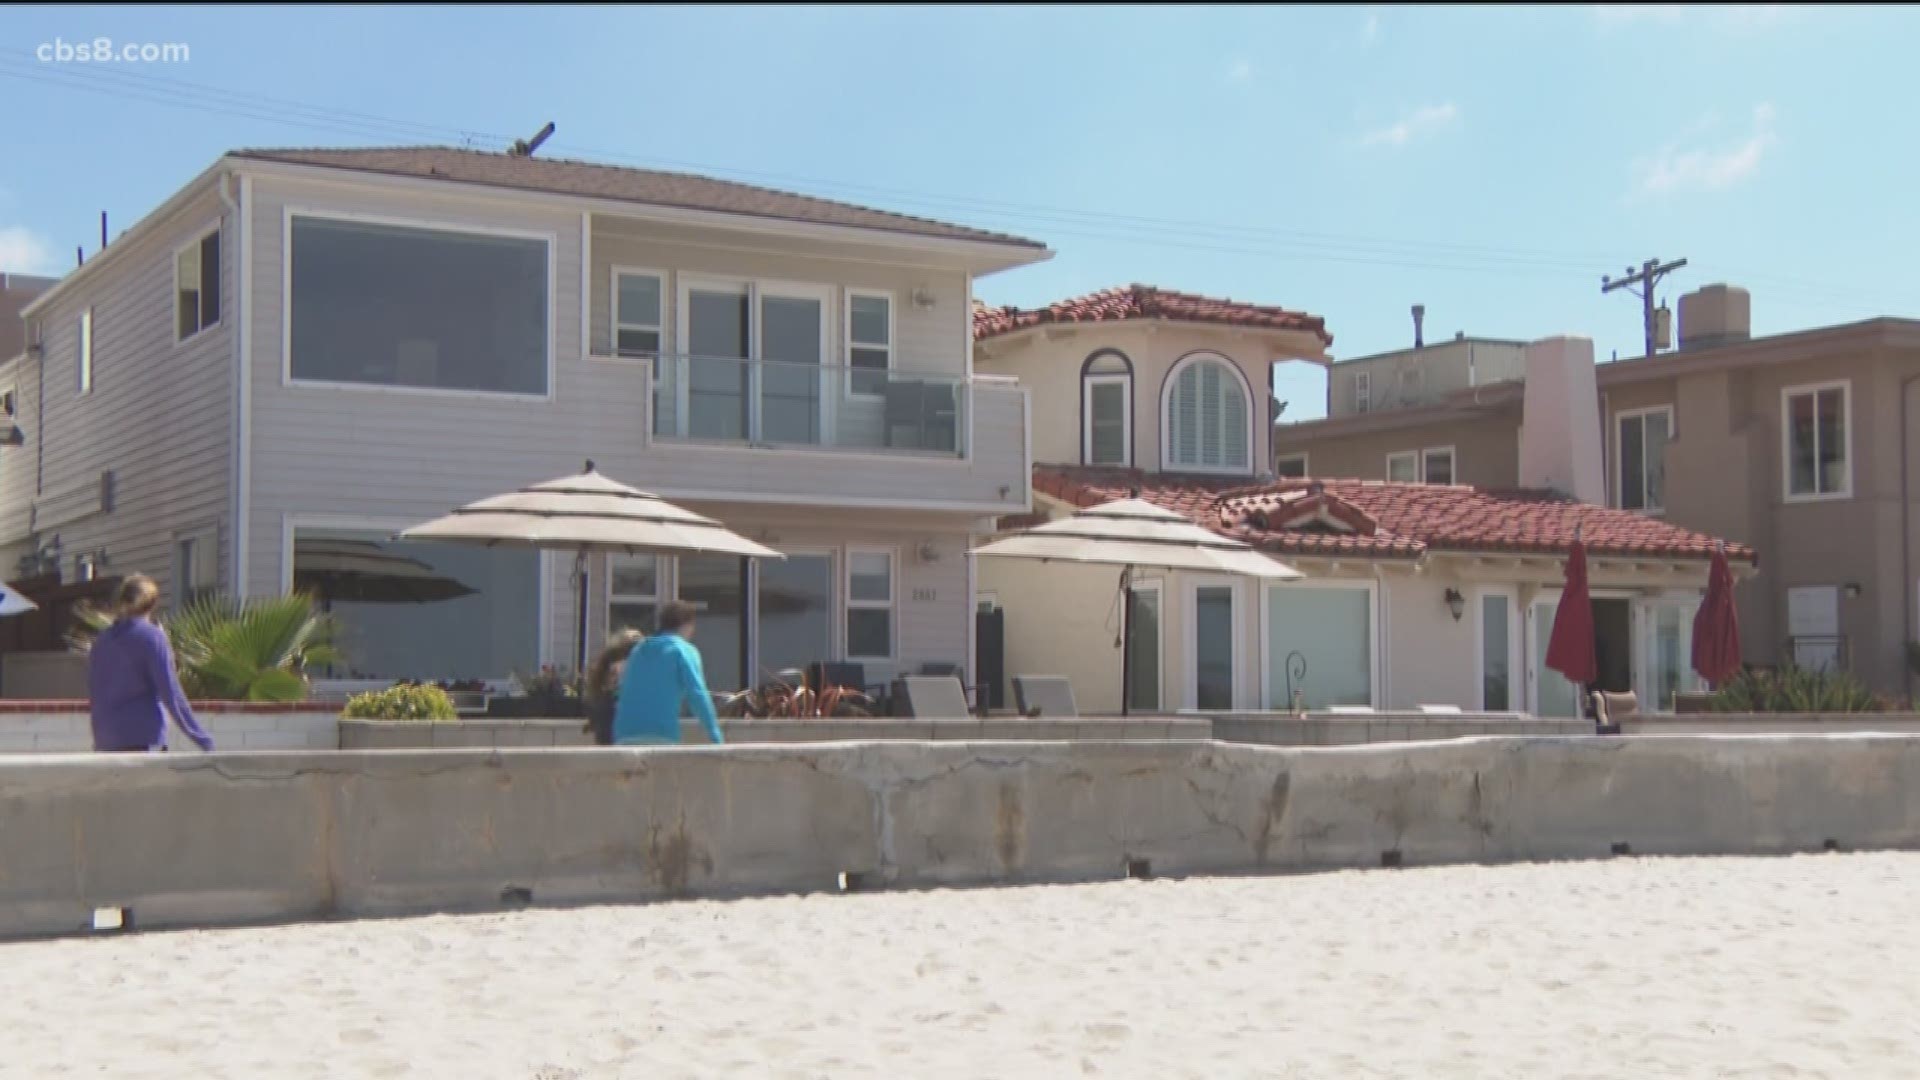 A move to crack down on short-term vacation rentals is moving through the state legislature.